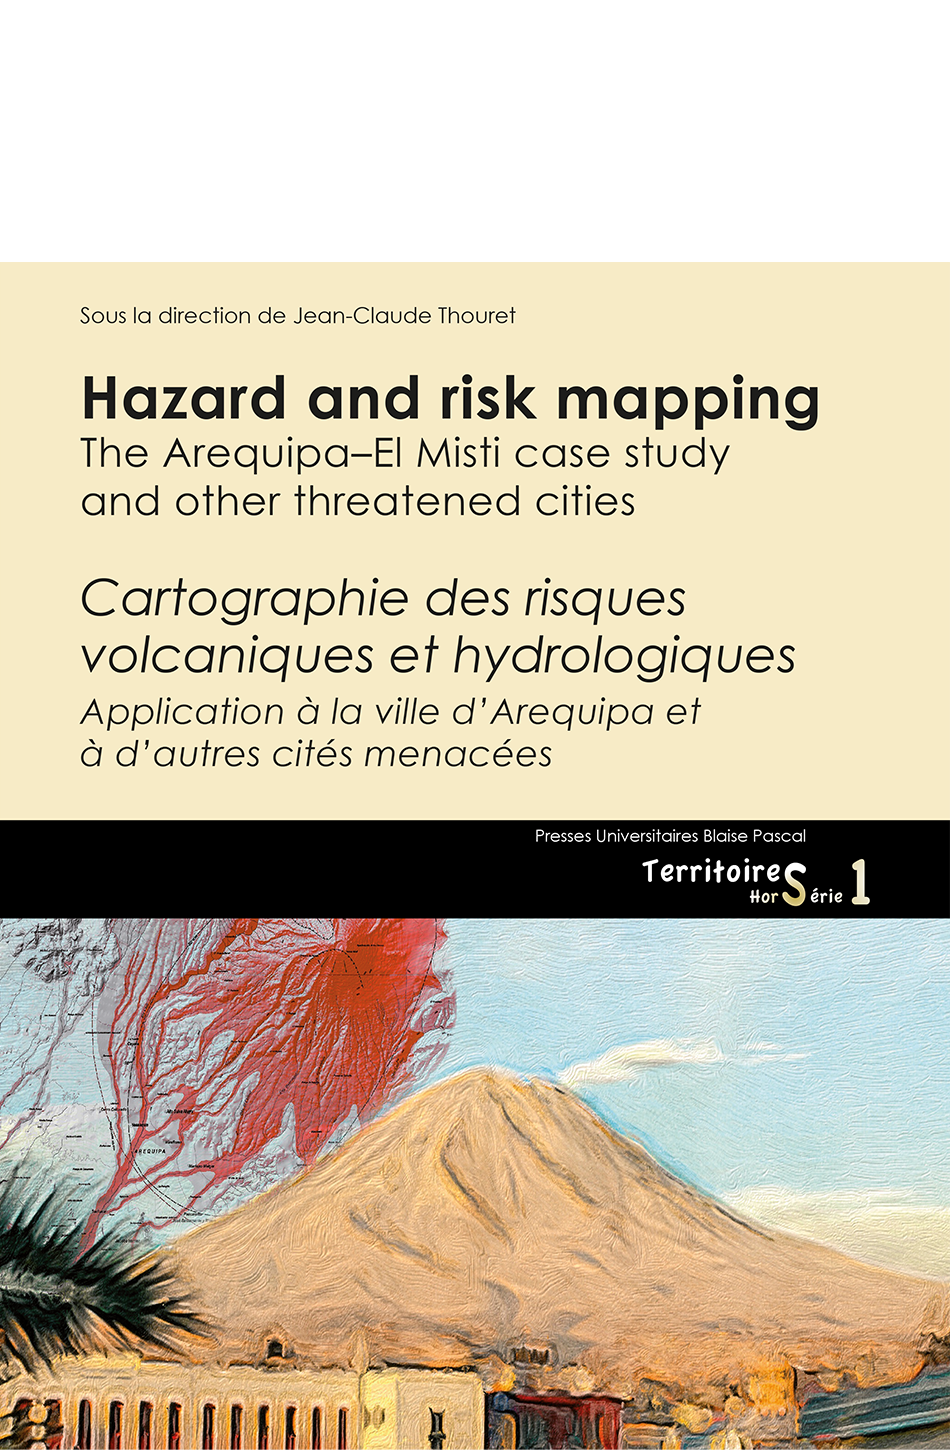 Hazard and risk mapping